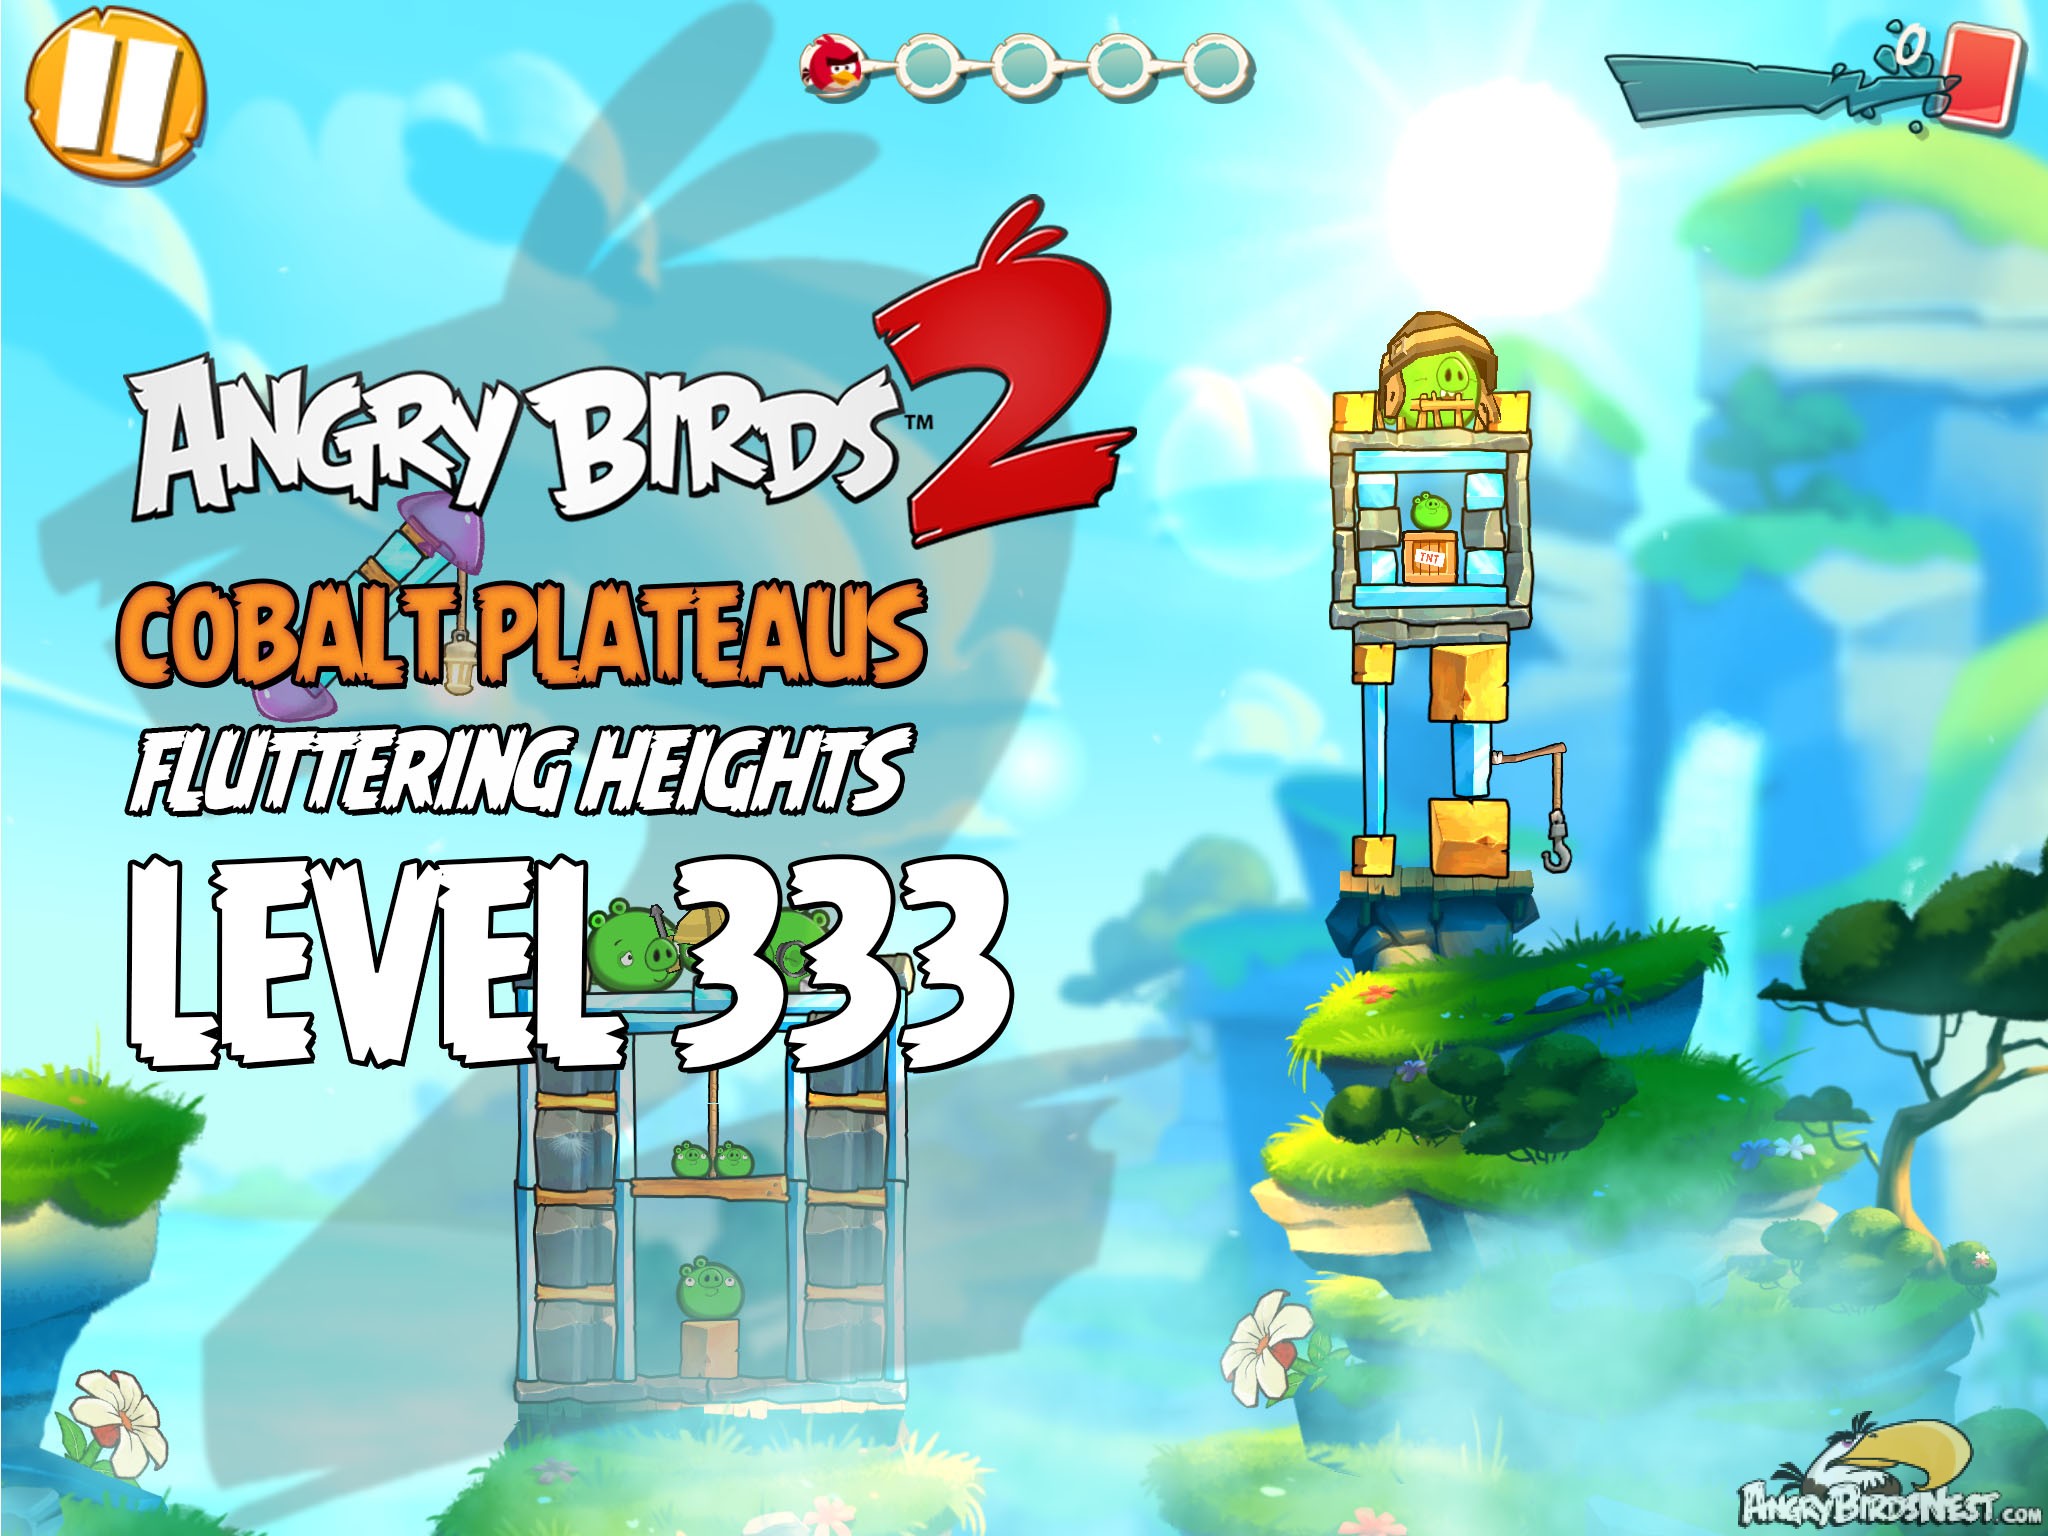 Angry Birds 2 Level 333 Cobalt Plateaus Fluttering Heights Image